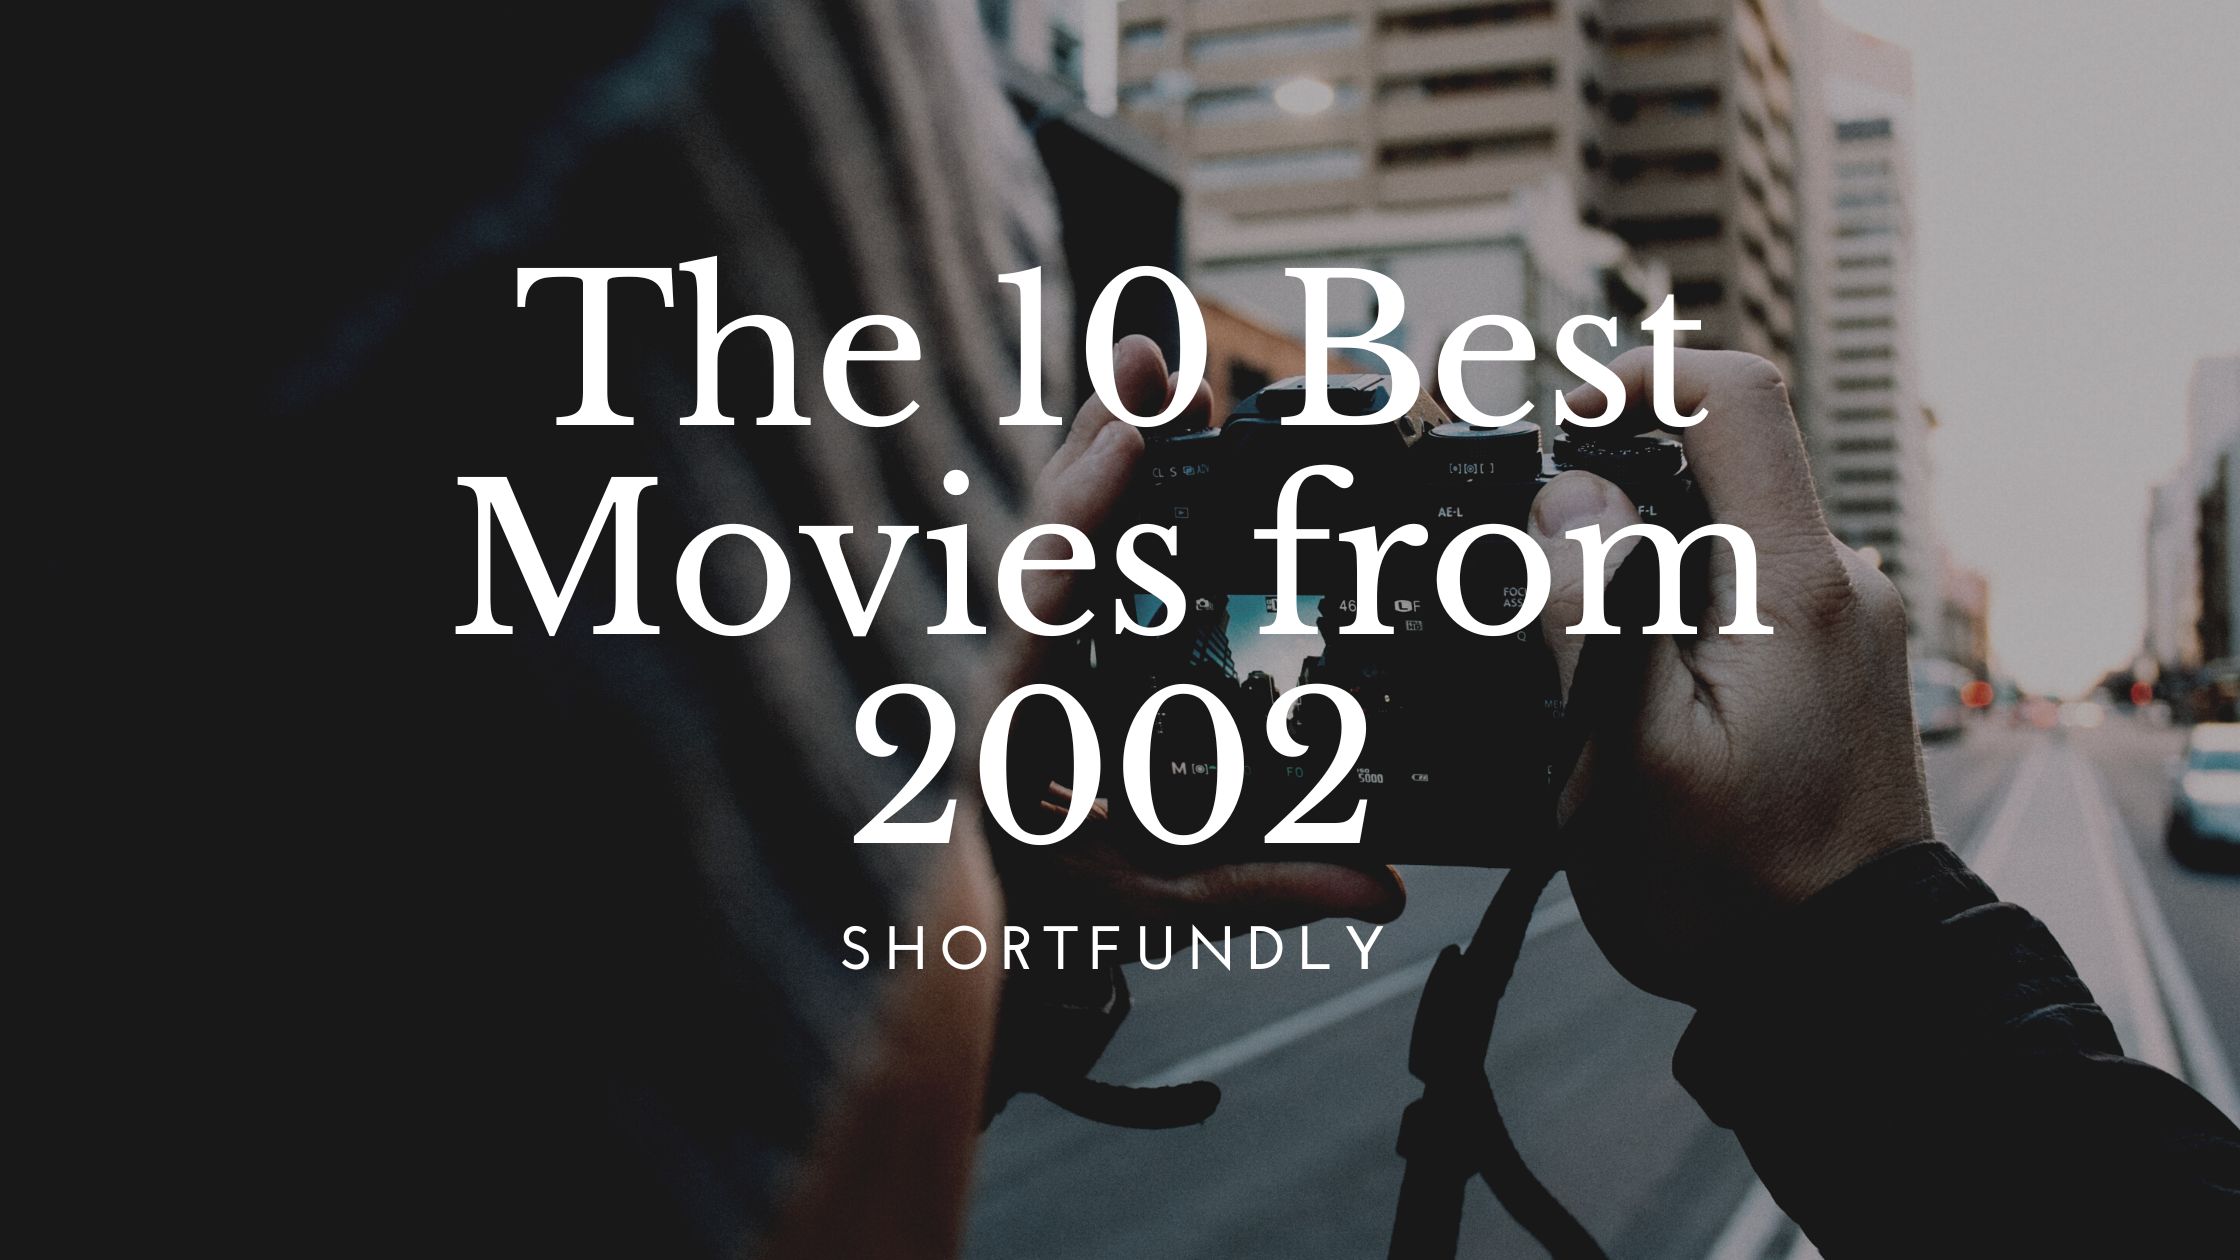 The 10 Best Movies from 2002